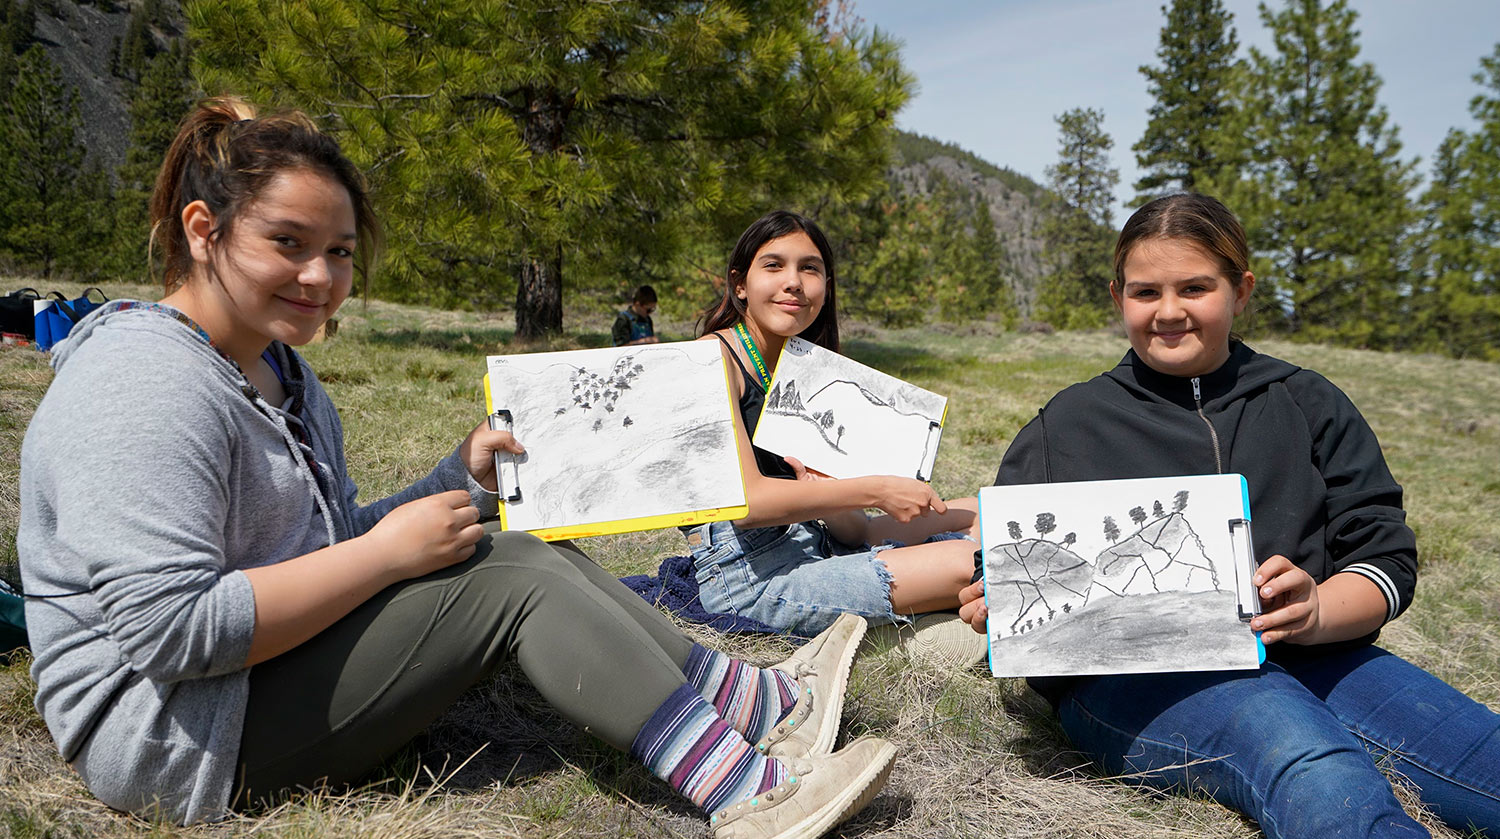 Students sketched the landscape using charcoals supported by a local artist.